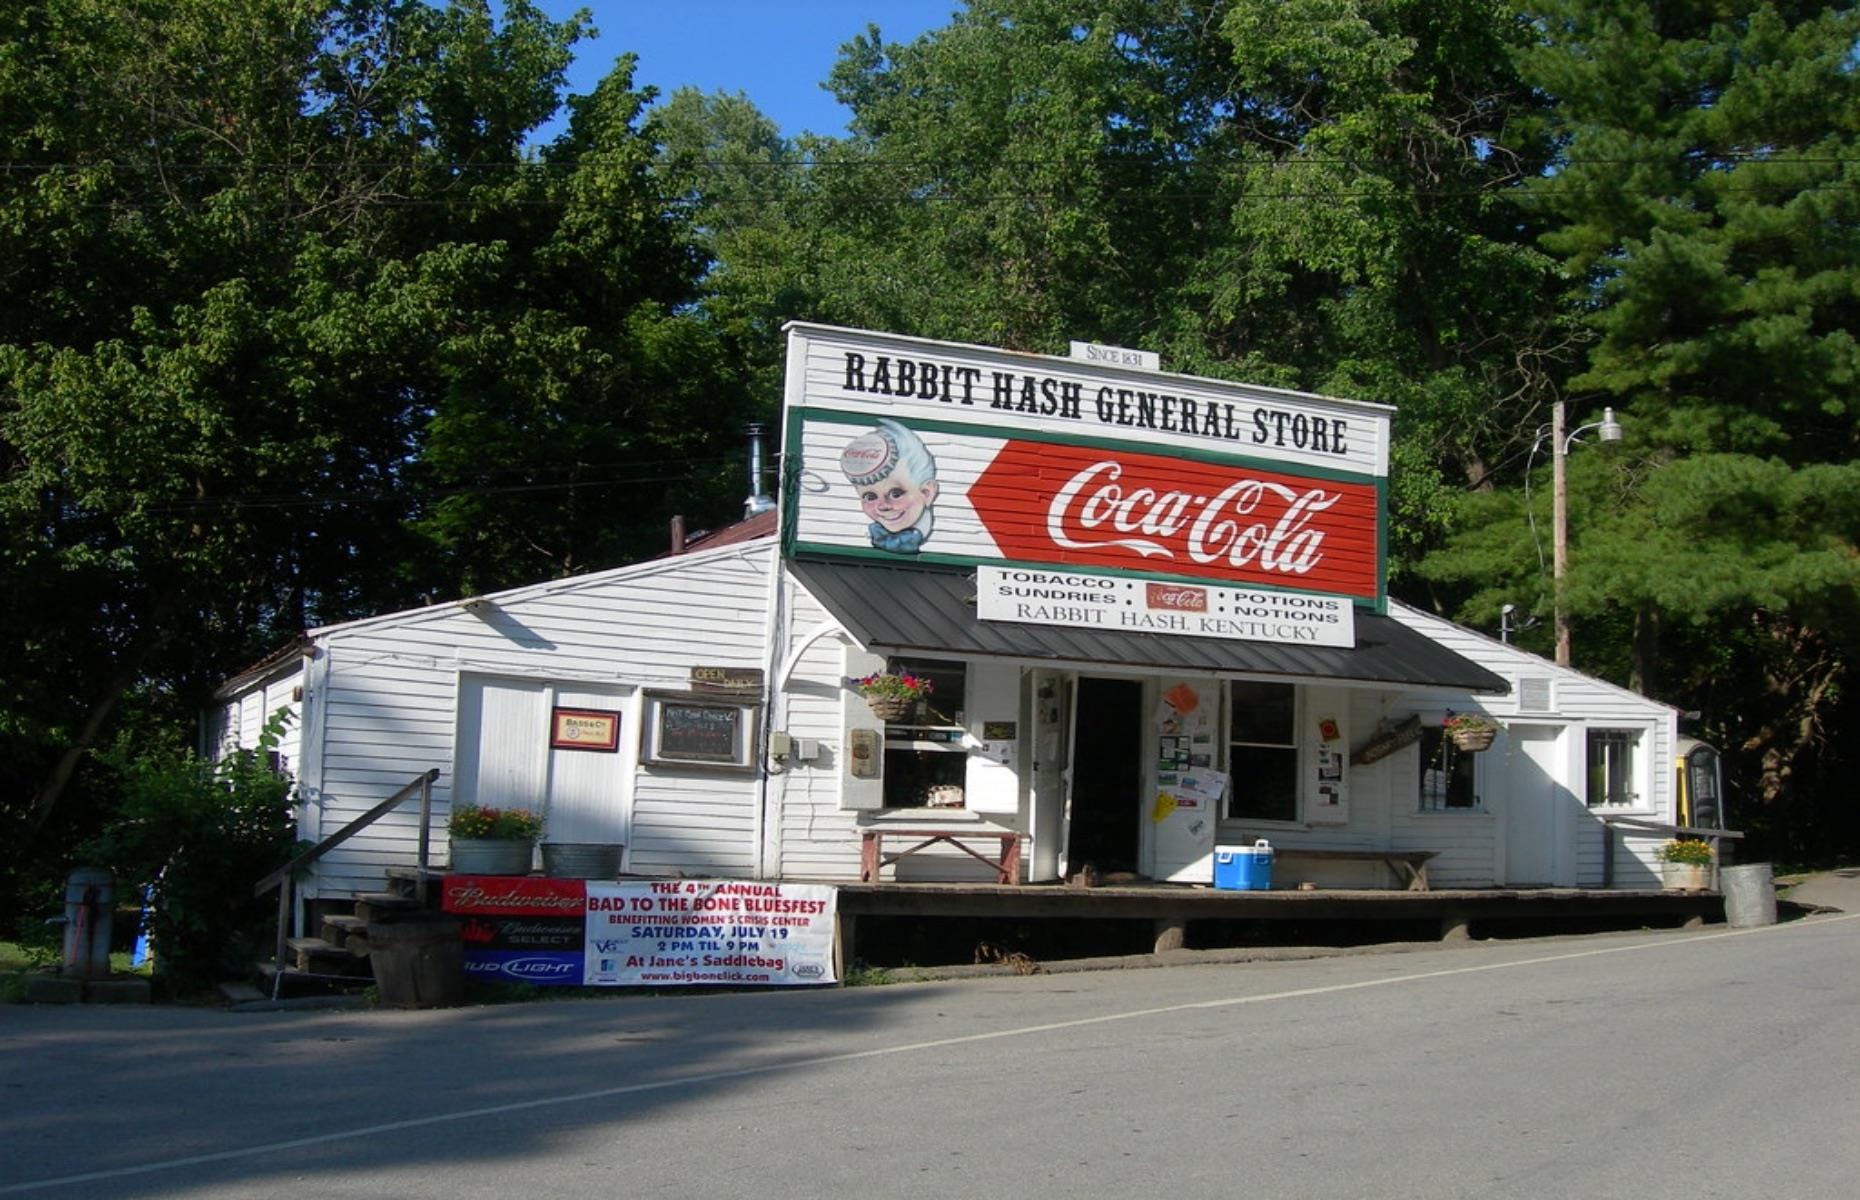 <p>The historic hamlet of Rabbit Hash on the Ohio River is a small but perfectly formed microcosm of Americana, named on the US National Register of Historic Places for its old tumbledown wooden buildings dating back more than 200 years. One of the most atmospheric is the Rabbit Hash General Store (pictured), generally considered the oldest example of its kind in the state, with a large front porch that still serves as a local focal point.</p>  <p>Noted for its humor, a dog is the town's ceremonial mayor.</p>